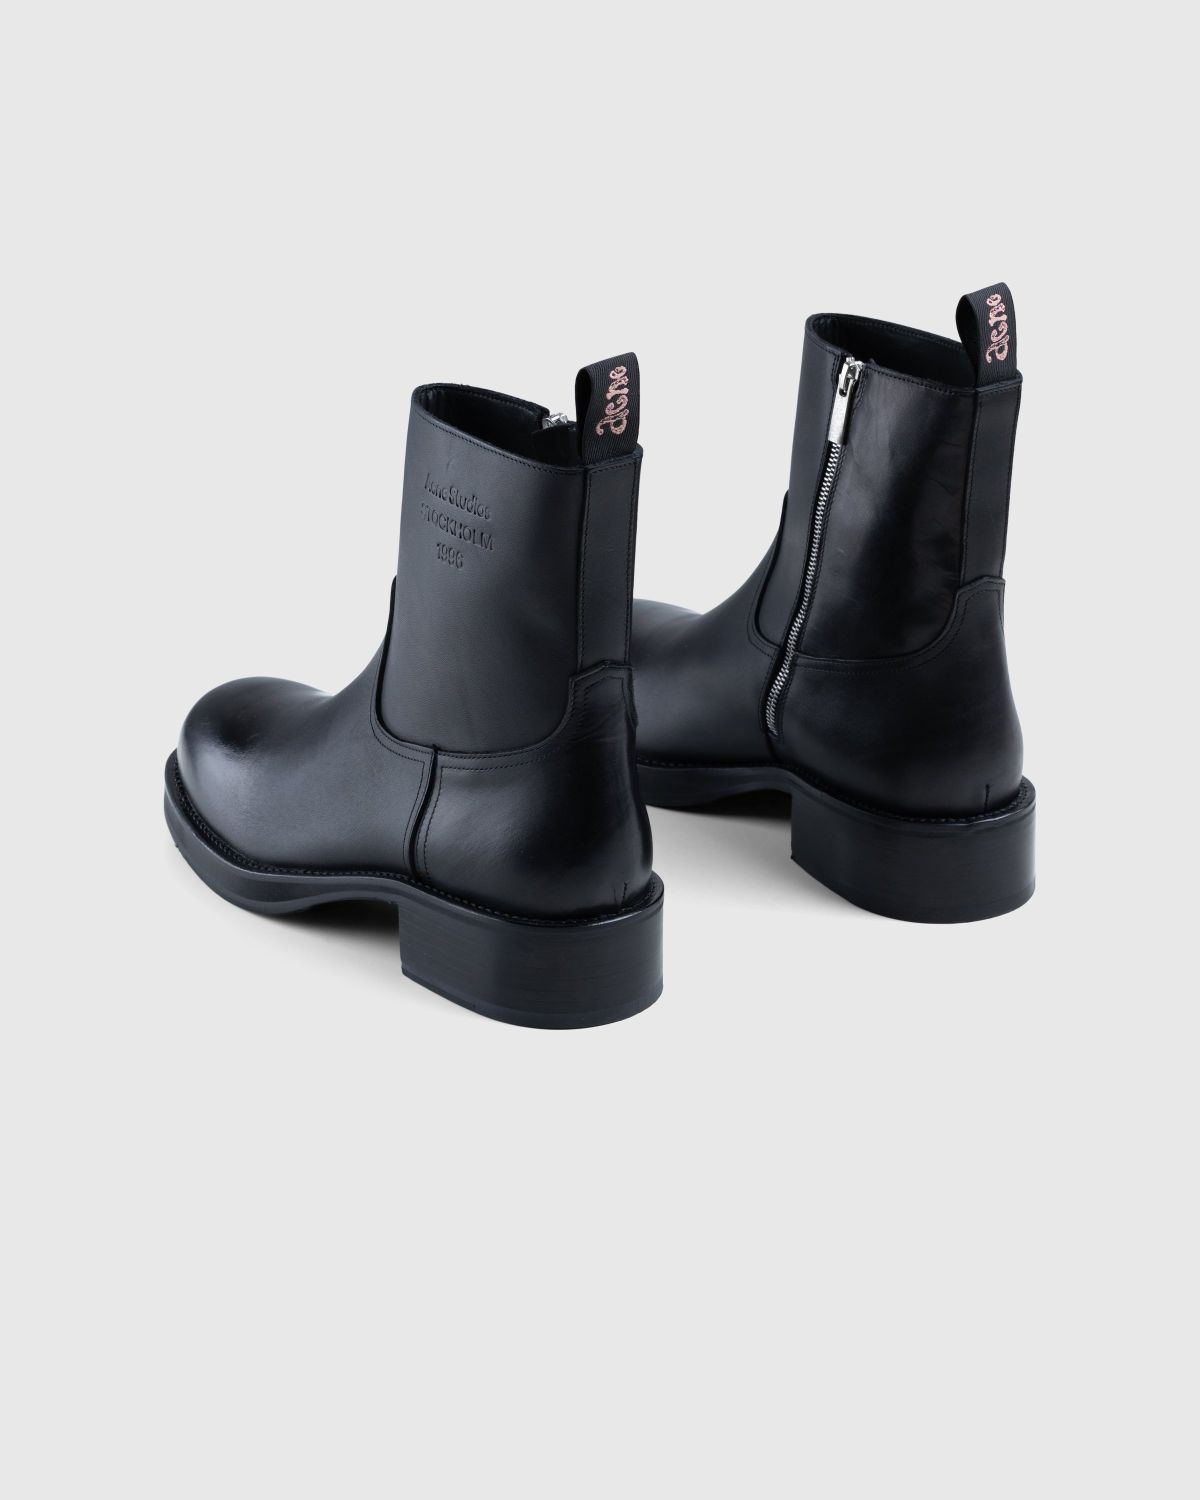 Acne Studios – Sprayed Leather Ankle Boots Black - Boots - Black - Image 4